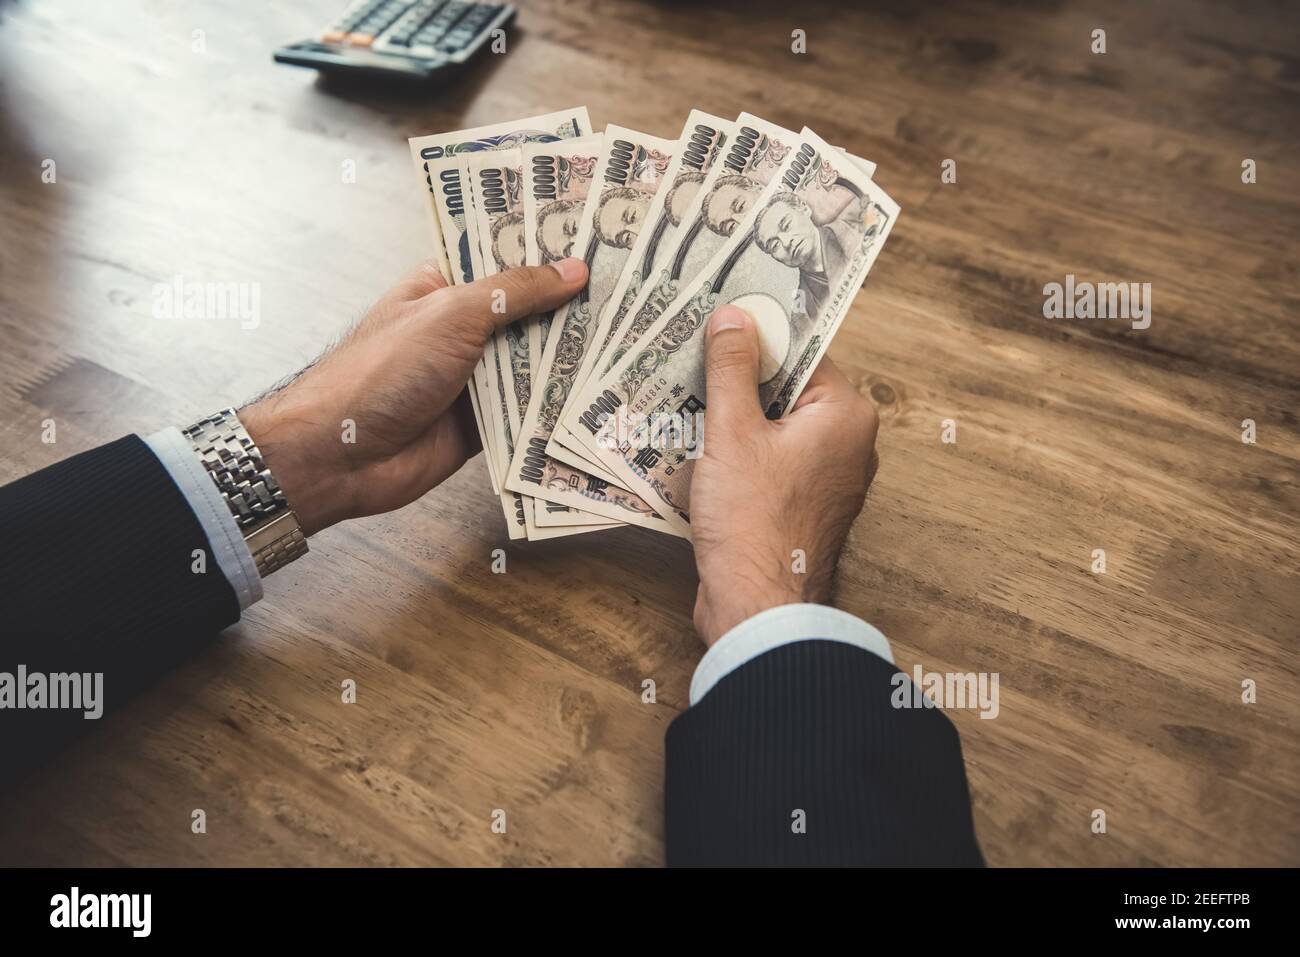 Businessman counting money, Japanese yen banknotes, at wooden table Stock Photo